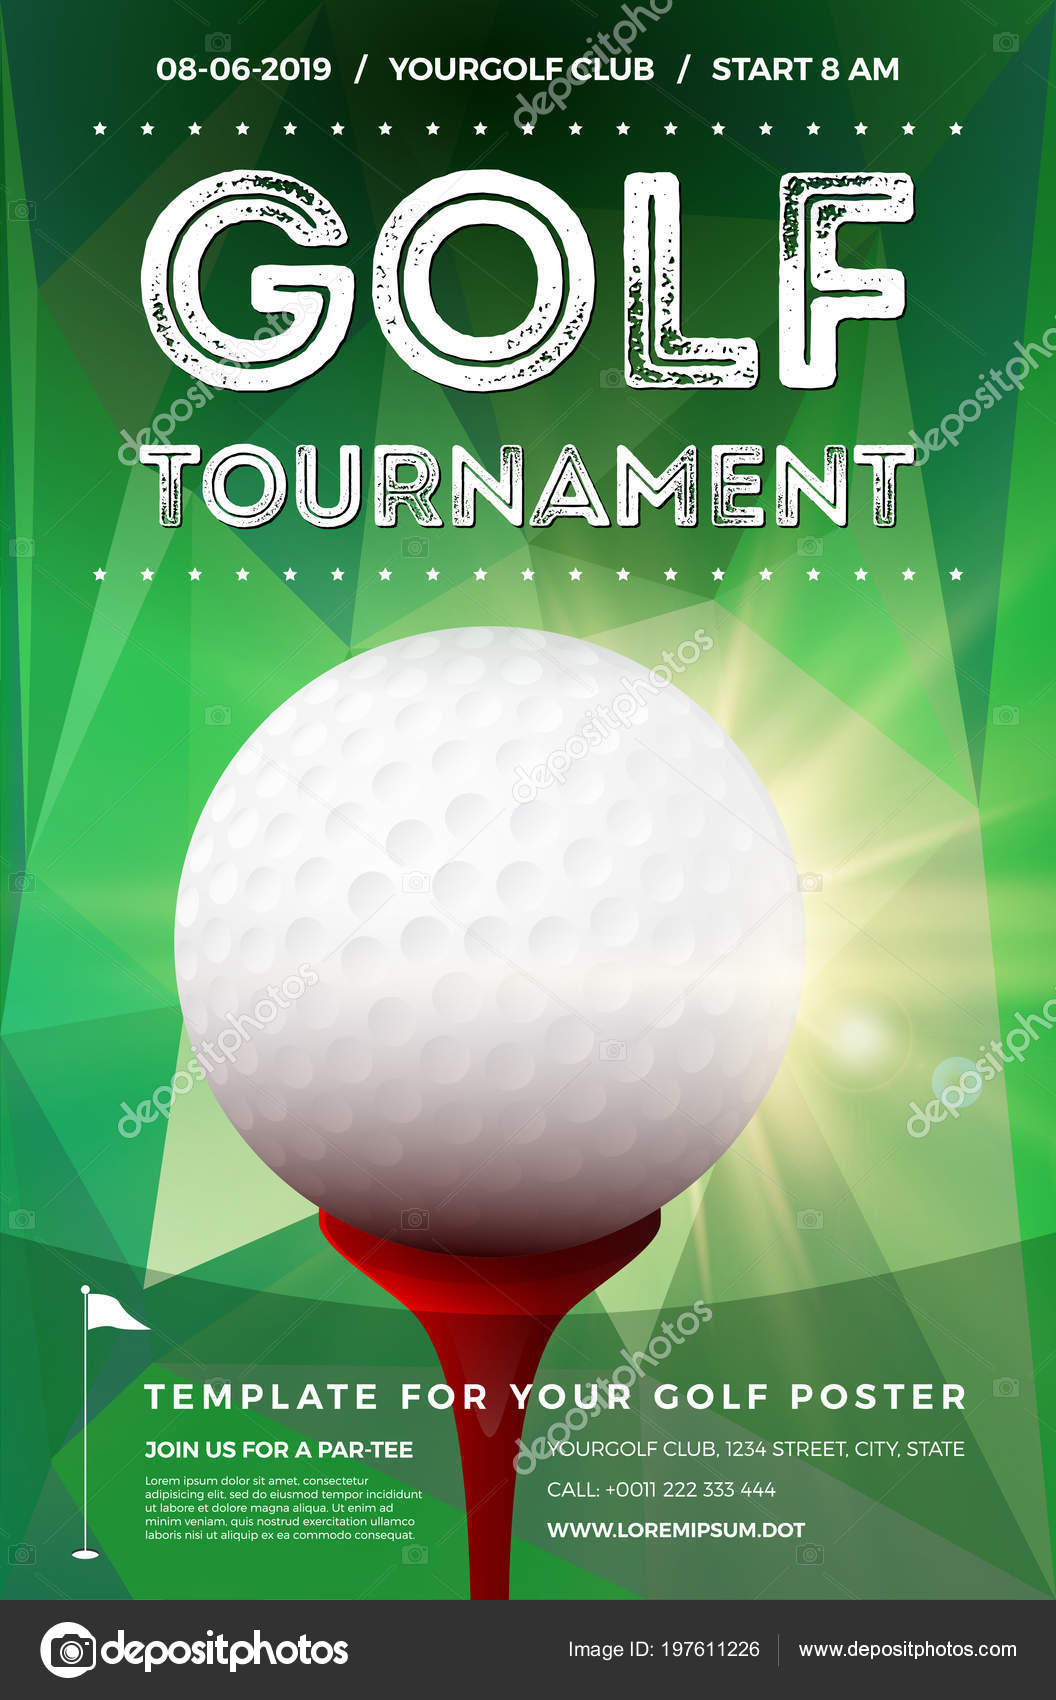 Free Vector  Golf tournament flyer in realistic style